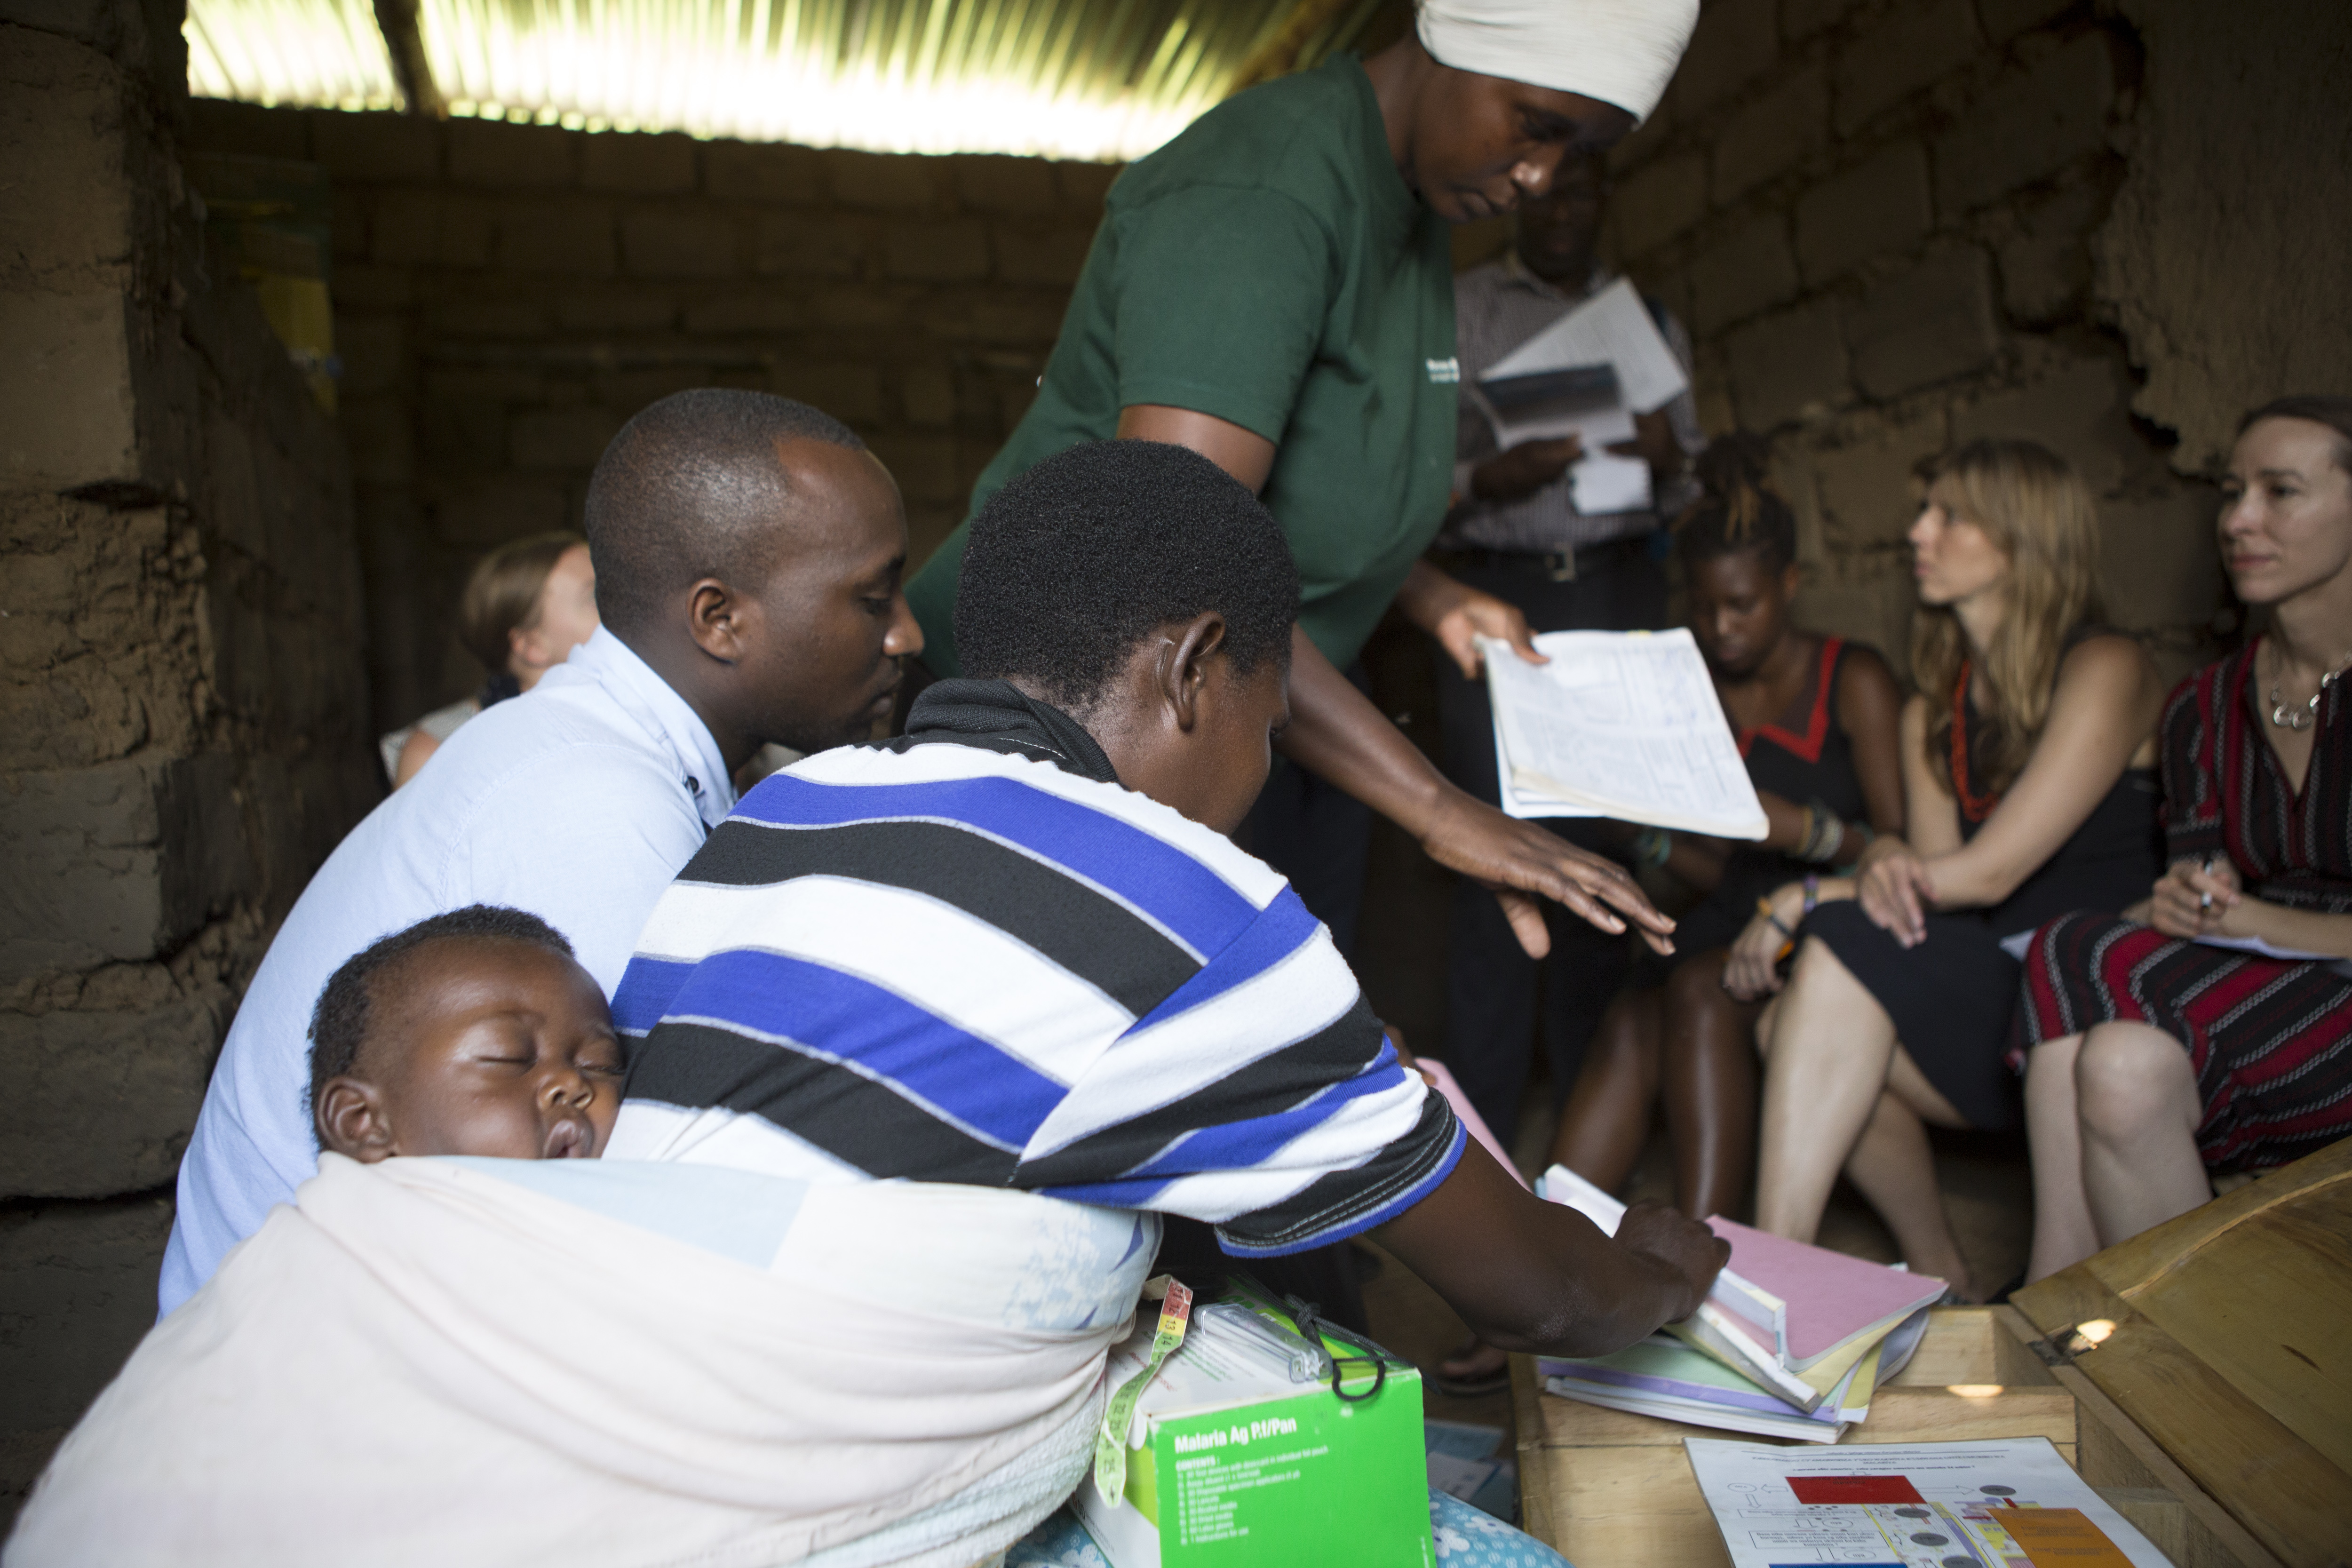 A community health worker walks students through her toolbox of patient logs, health assessments, and treatments.